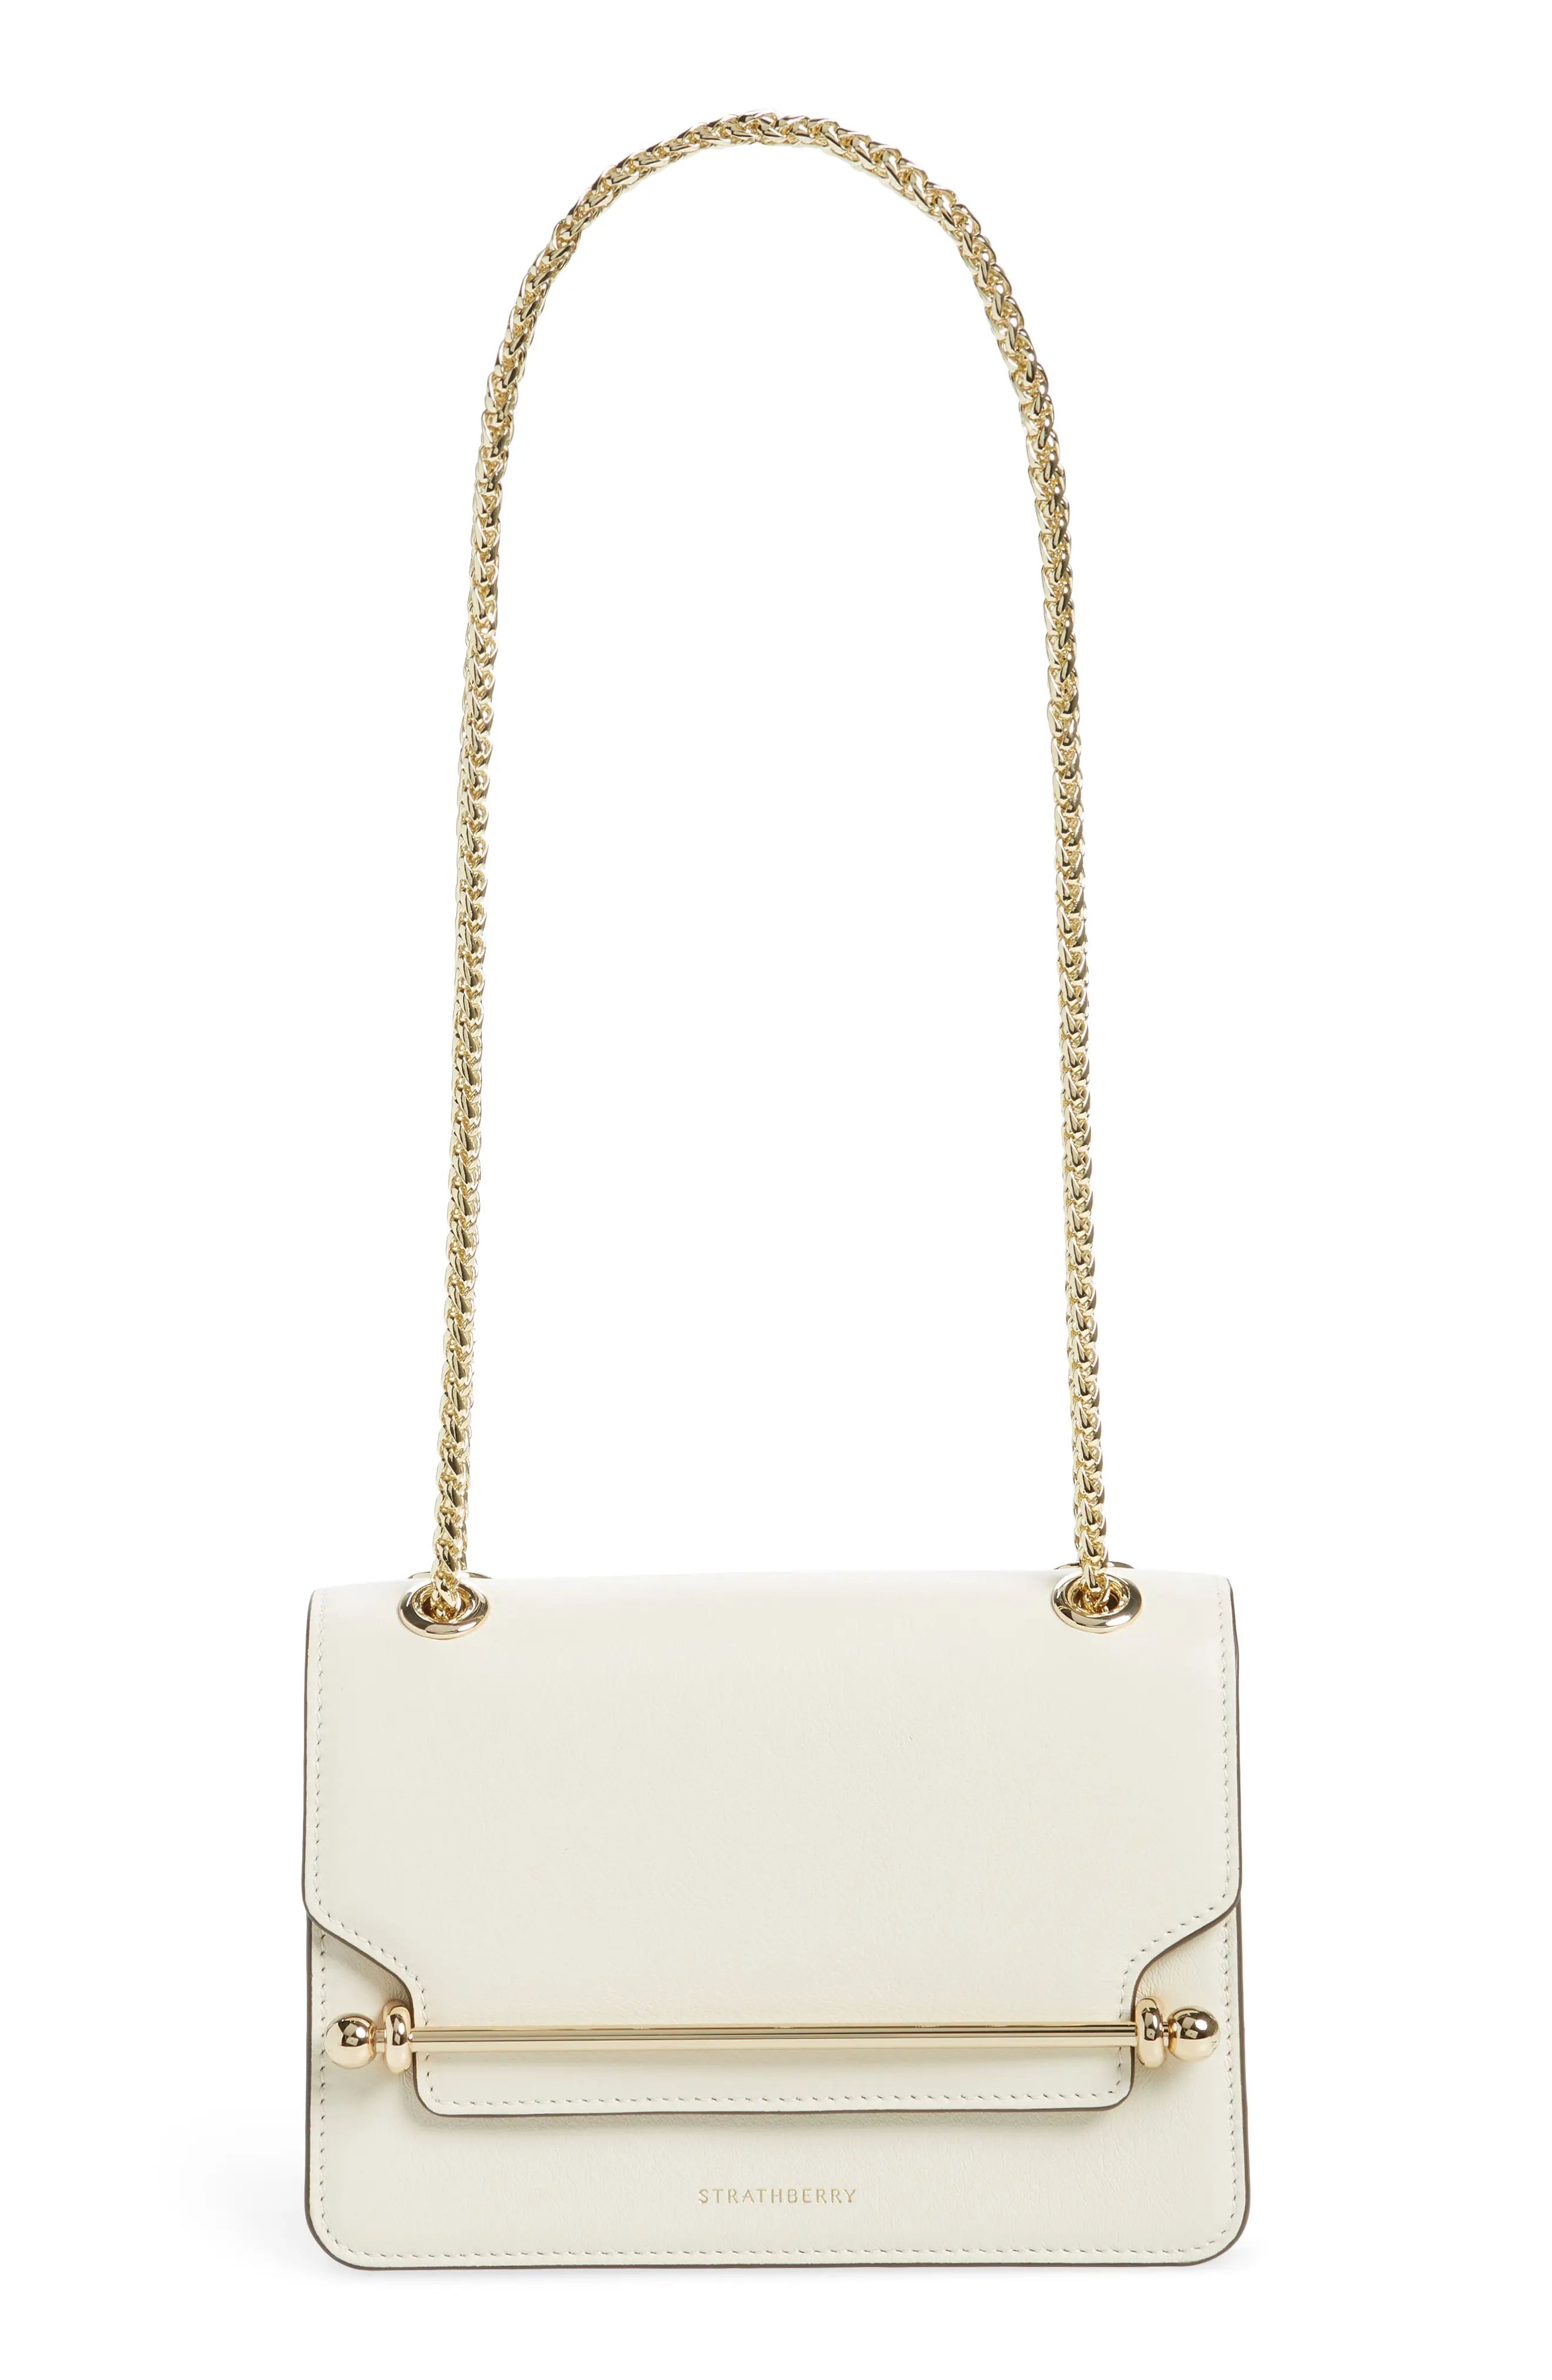 Strathberry Mini East/west Leather Crossbody Bag - Ivory | Nordstrom